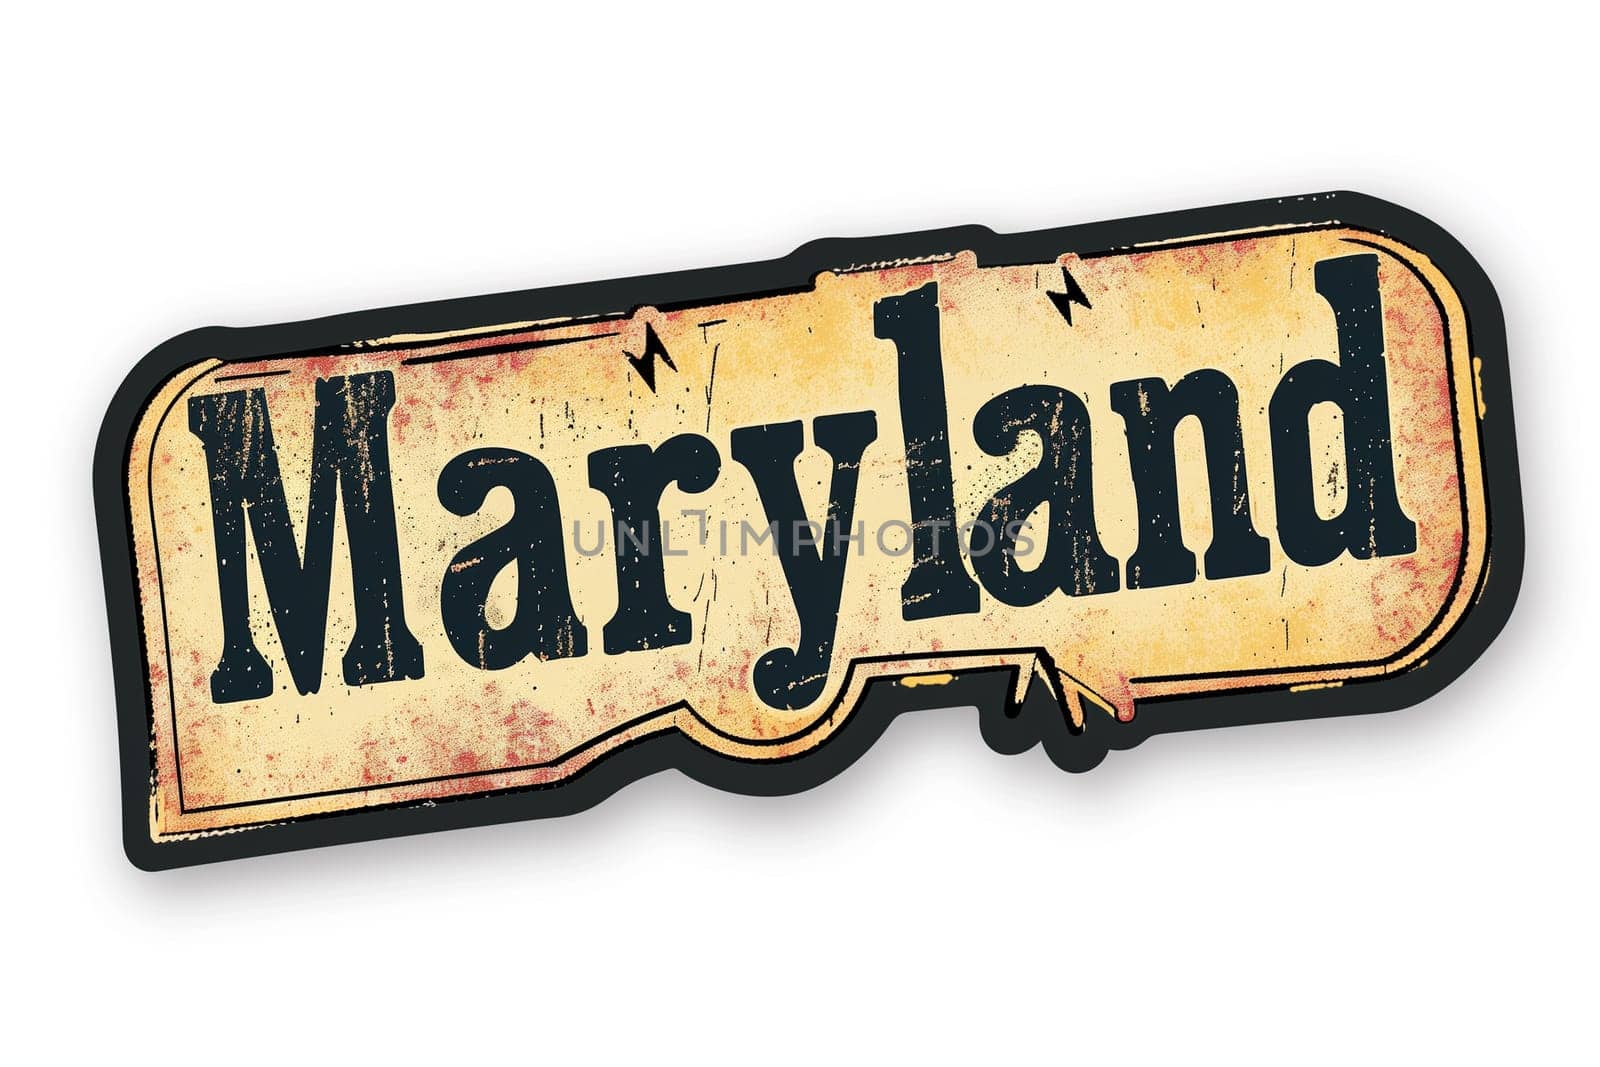 A sign displaying Maryland in a city environment, indicating the location.